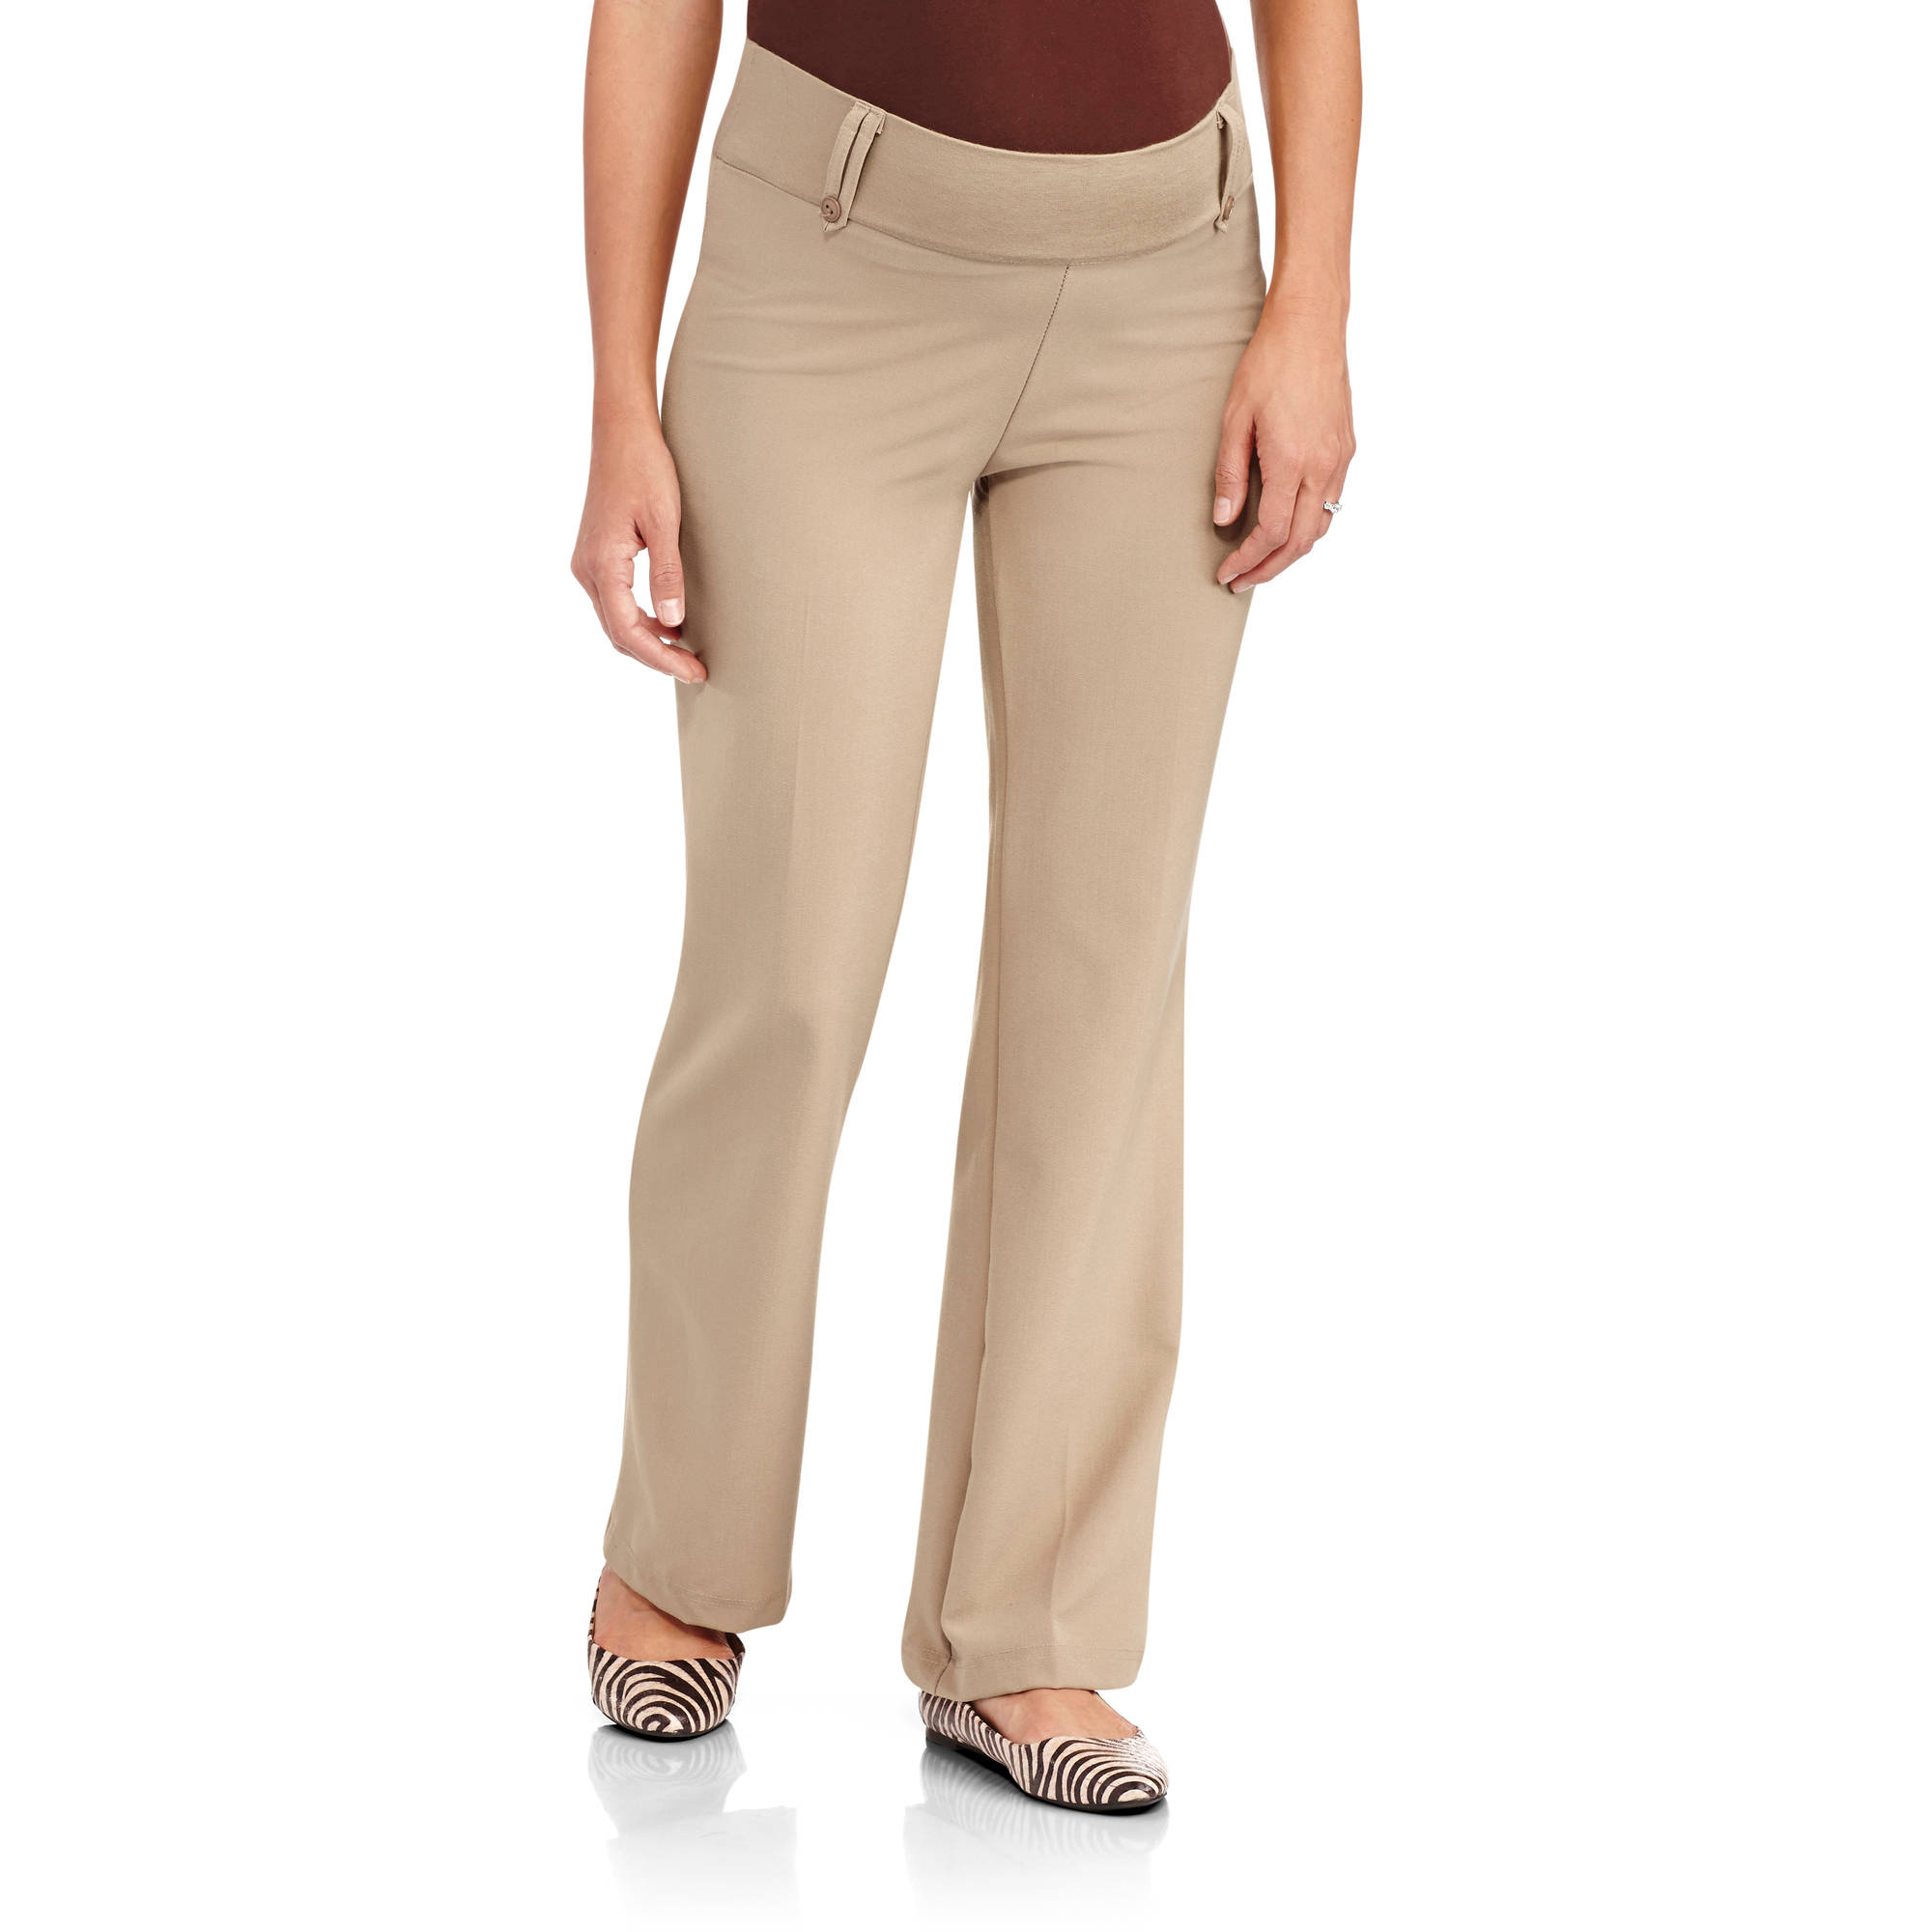 Maternity Demi-Panel Career Pants with Belt Loops - image 1 of 2